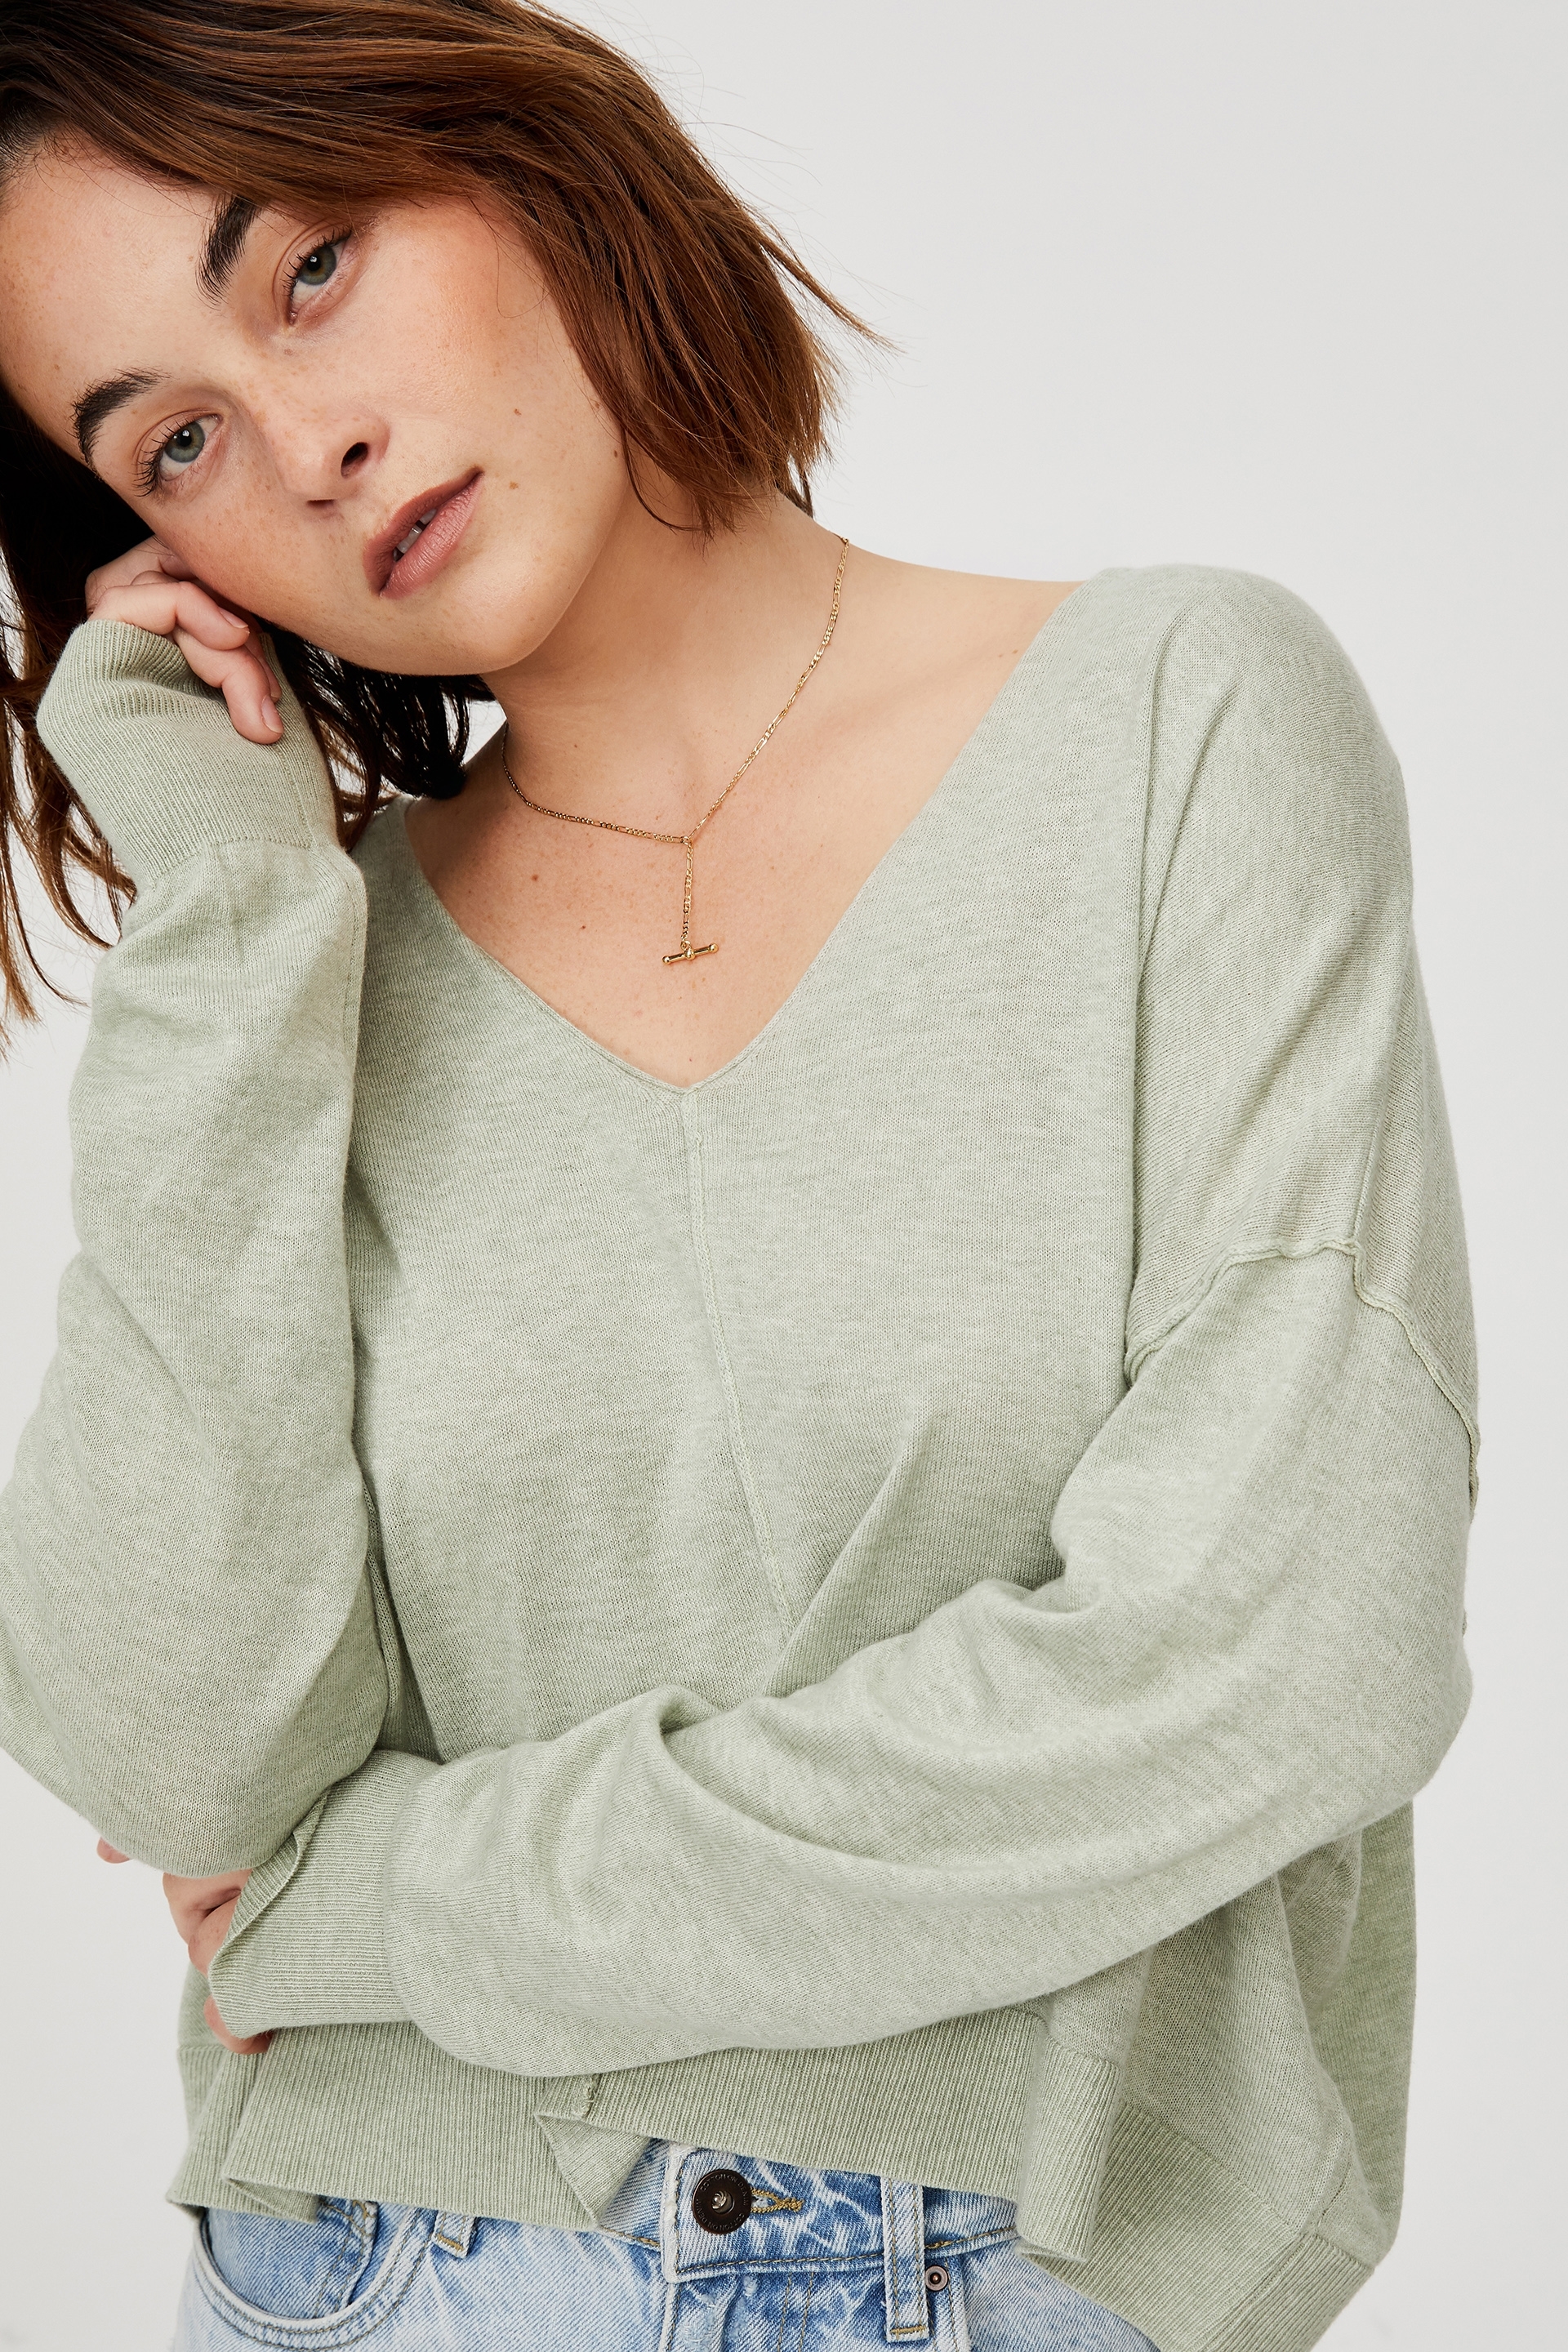 Cotton On Women - Cotton Vegetable Dye V Neck Pullover - Mulberry leaf green marle